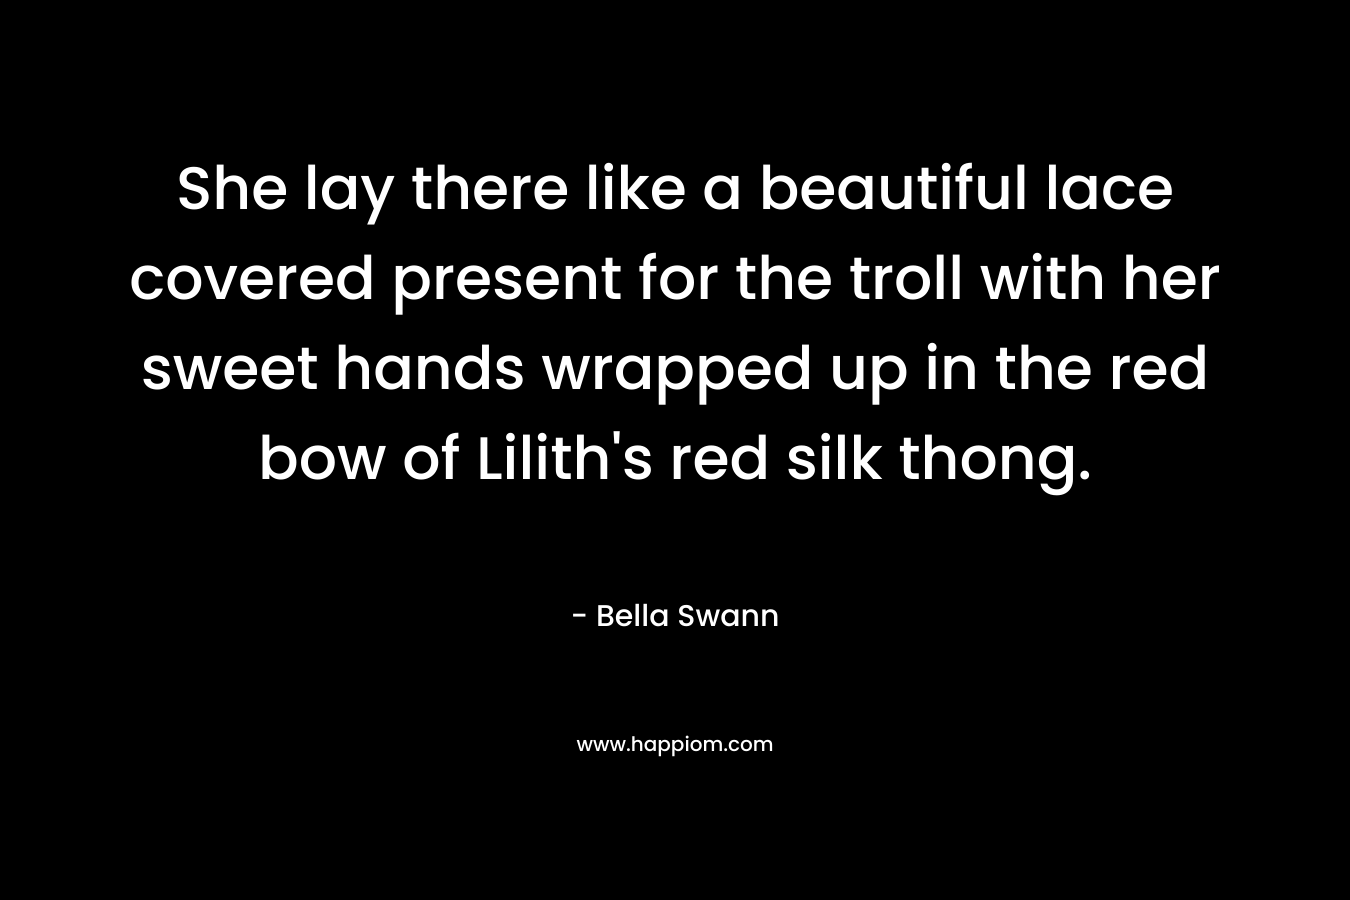 She lay there like a beautiful lace covered present for the troll with her sweet hands wrapped up in the red bow of Lilith’s red silk thong. – Bella Swann